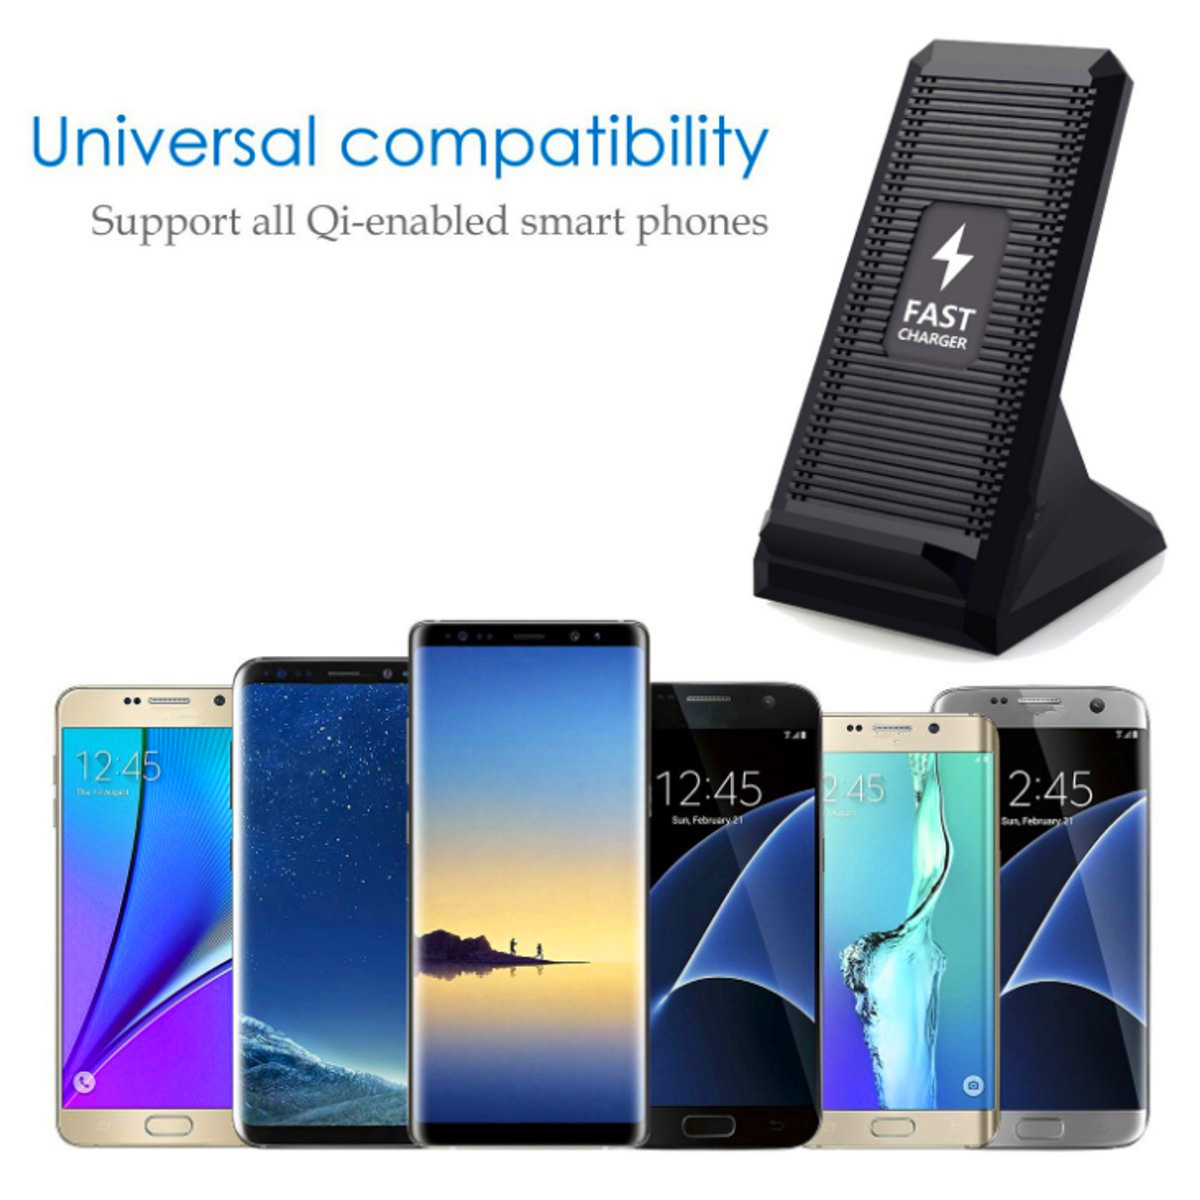 10W-Qi-Wireless-Charger-Fast-Charging-With-Cooling-Fan-Phone-Holder-For-iPhone-Samsung-Huawei-1422834-5